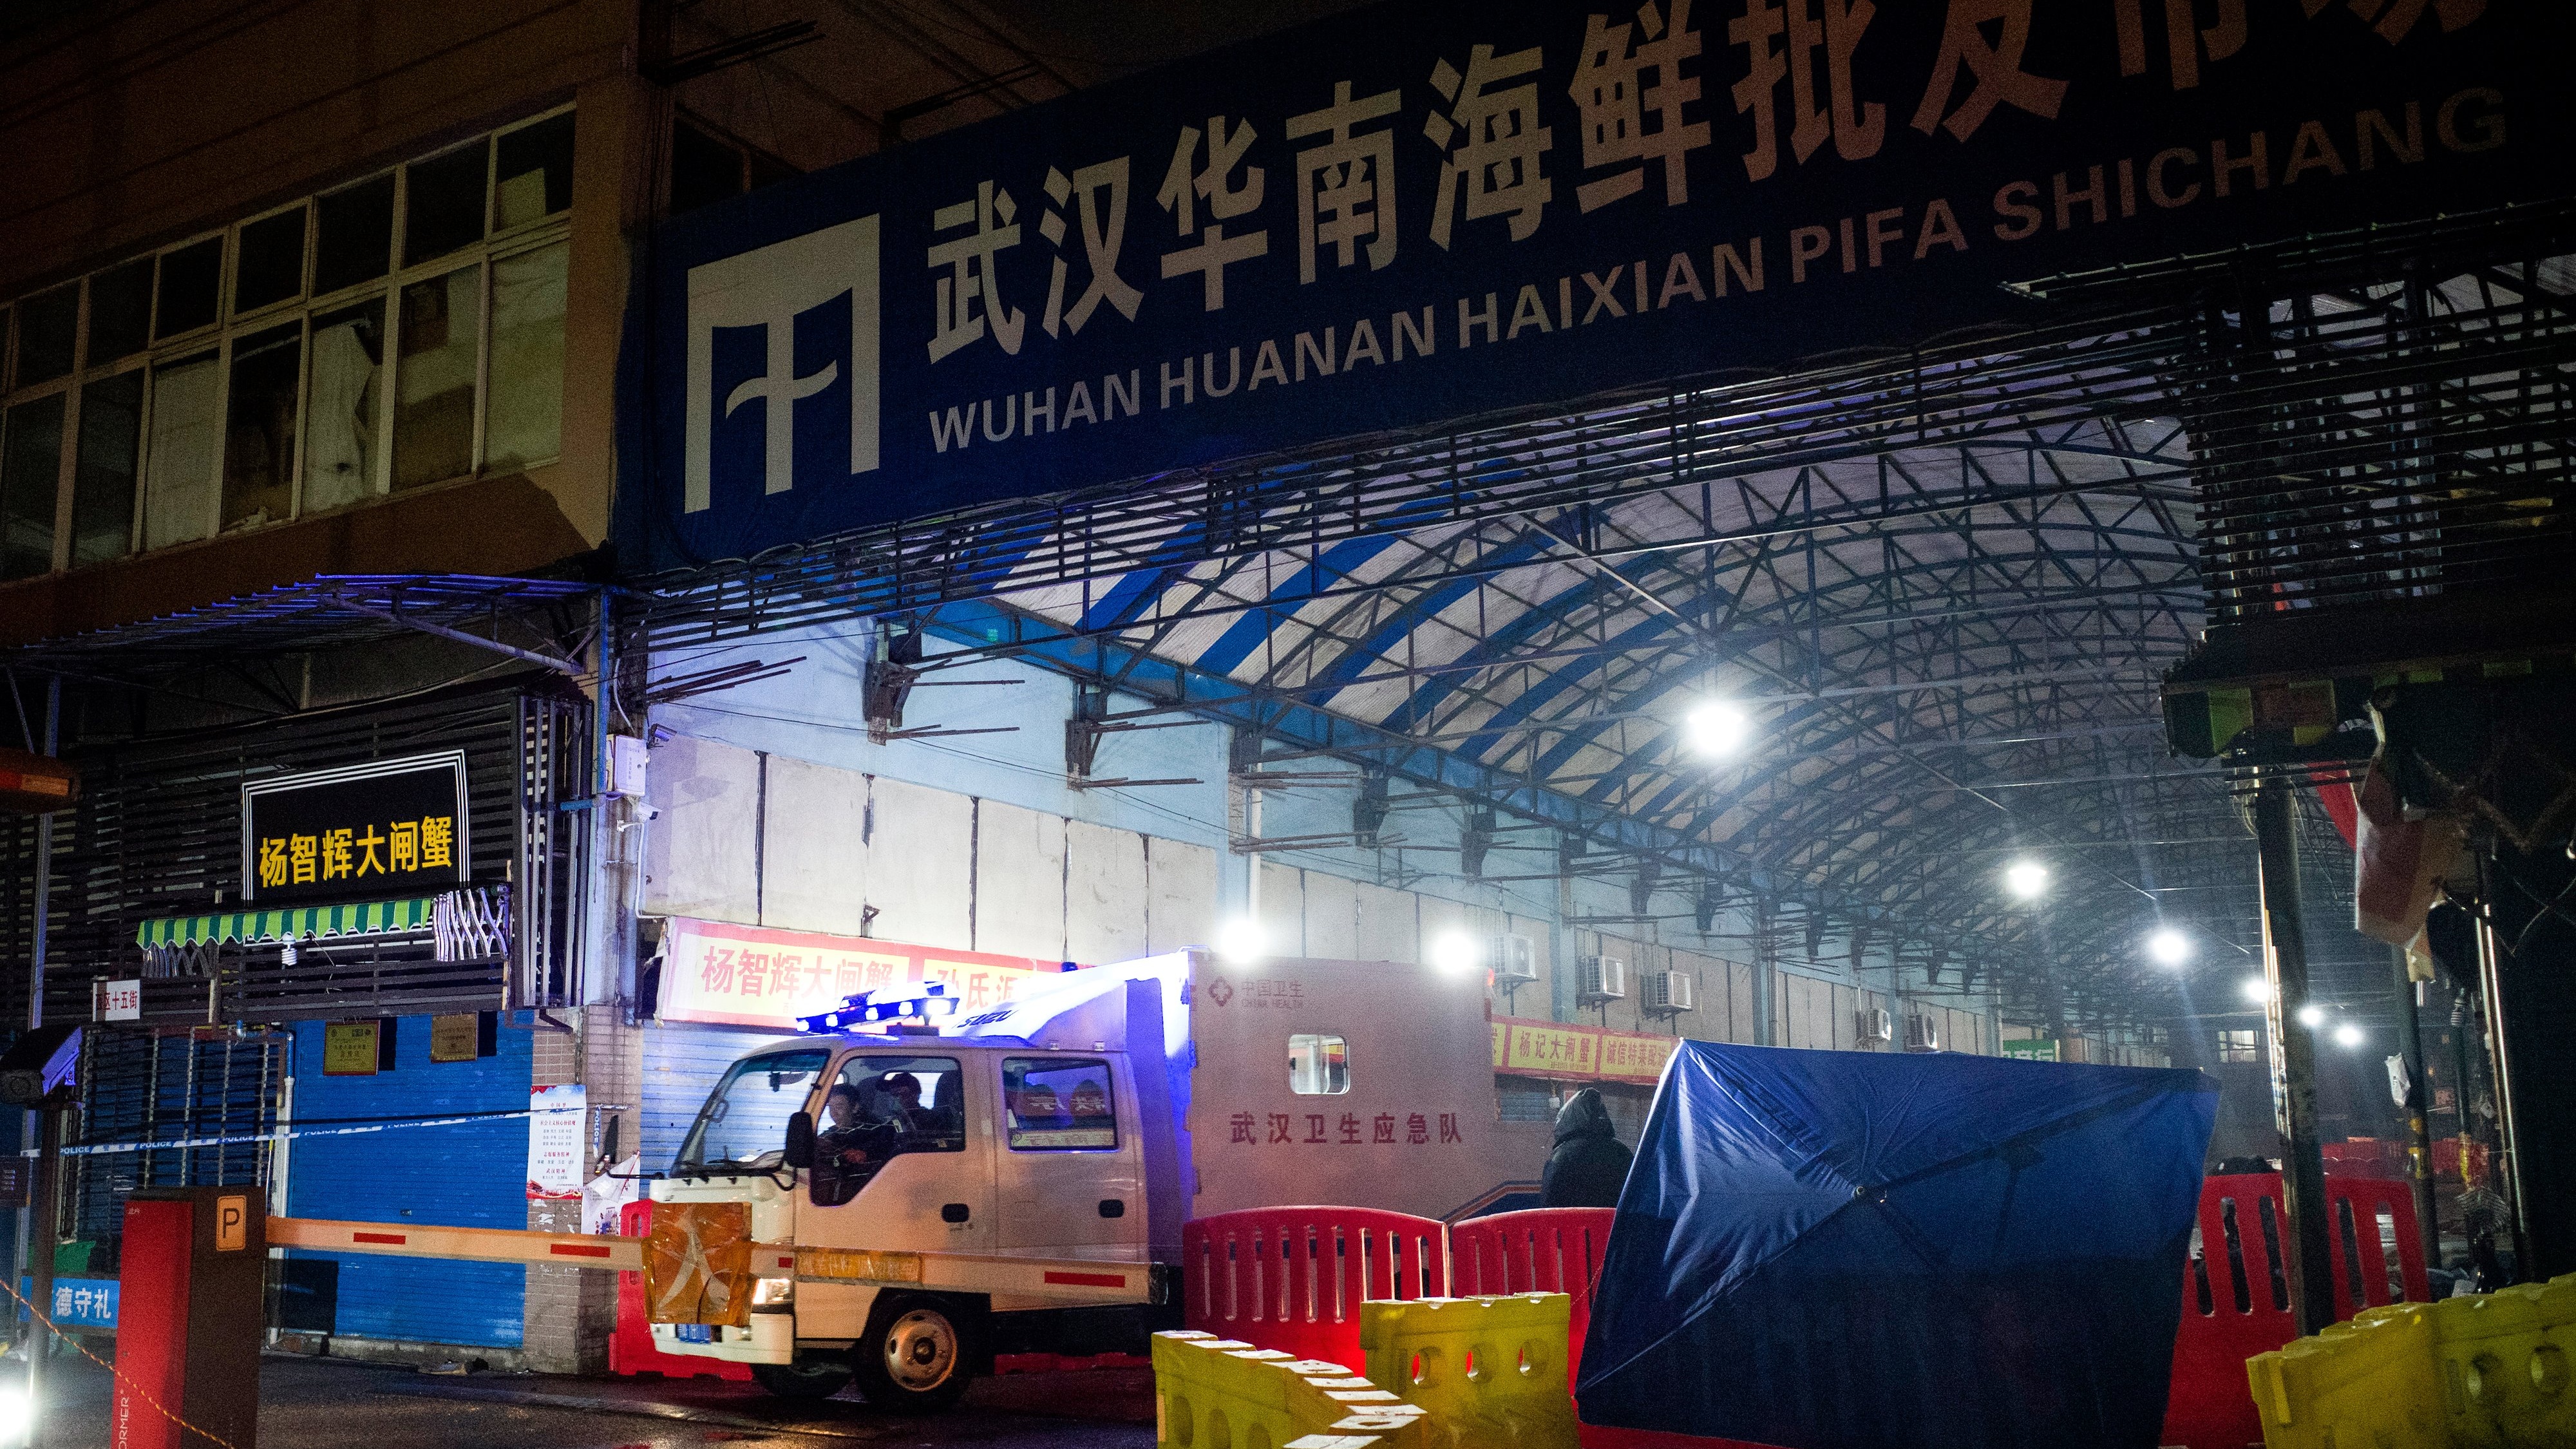 Huanan Seafood Market in Wuhan was originally cited as the epicentre of the Covid pandemic